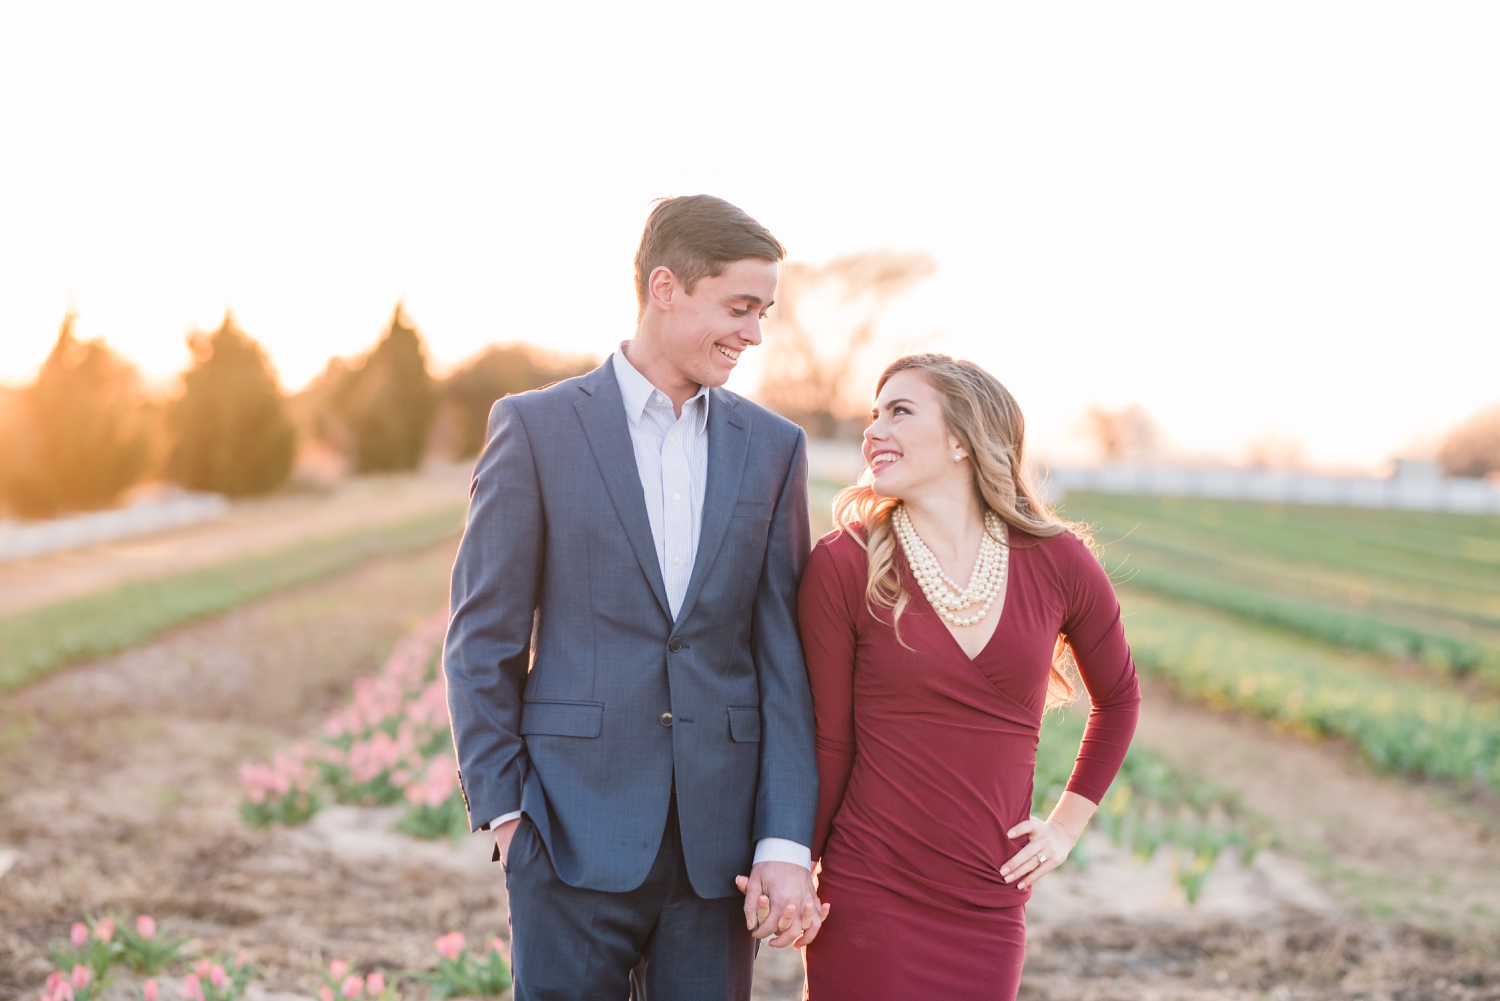 Engagement Session in Dallas with Flowers